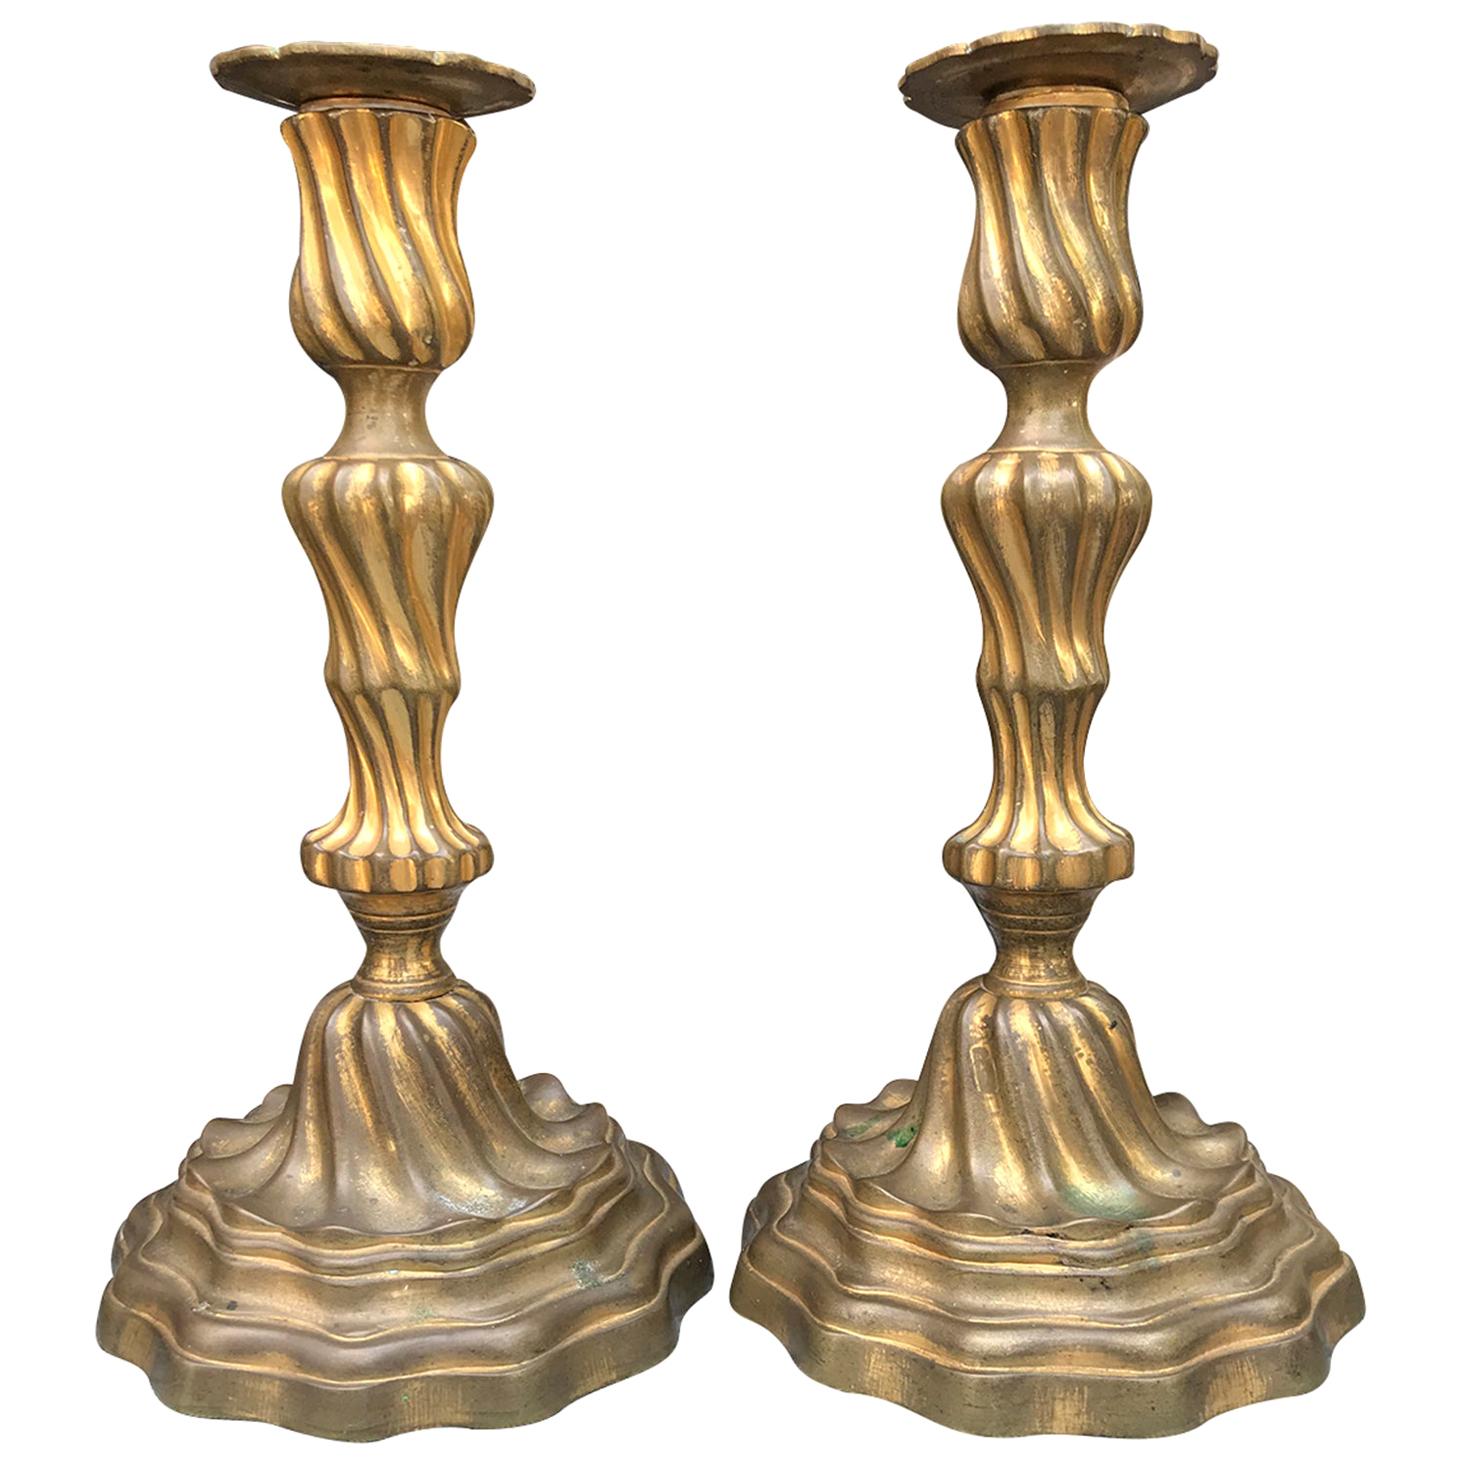 Pair of 19th Century French Louis XV Style Candlesticks